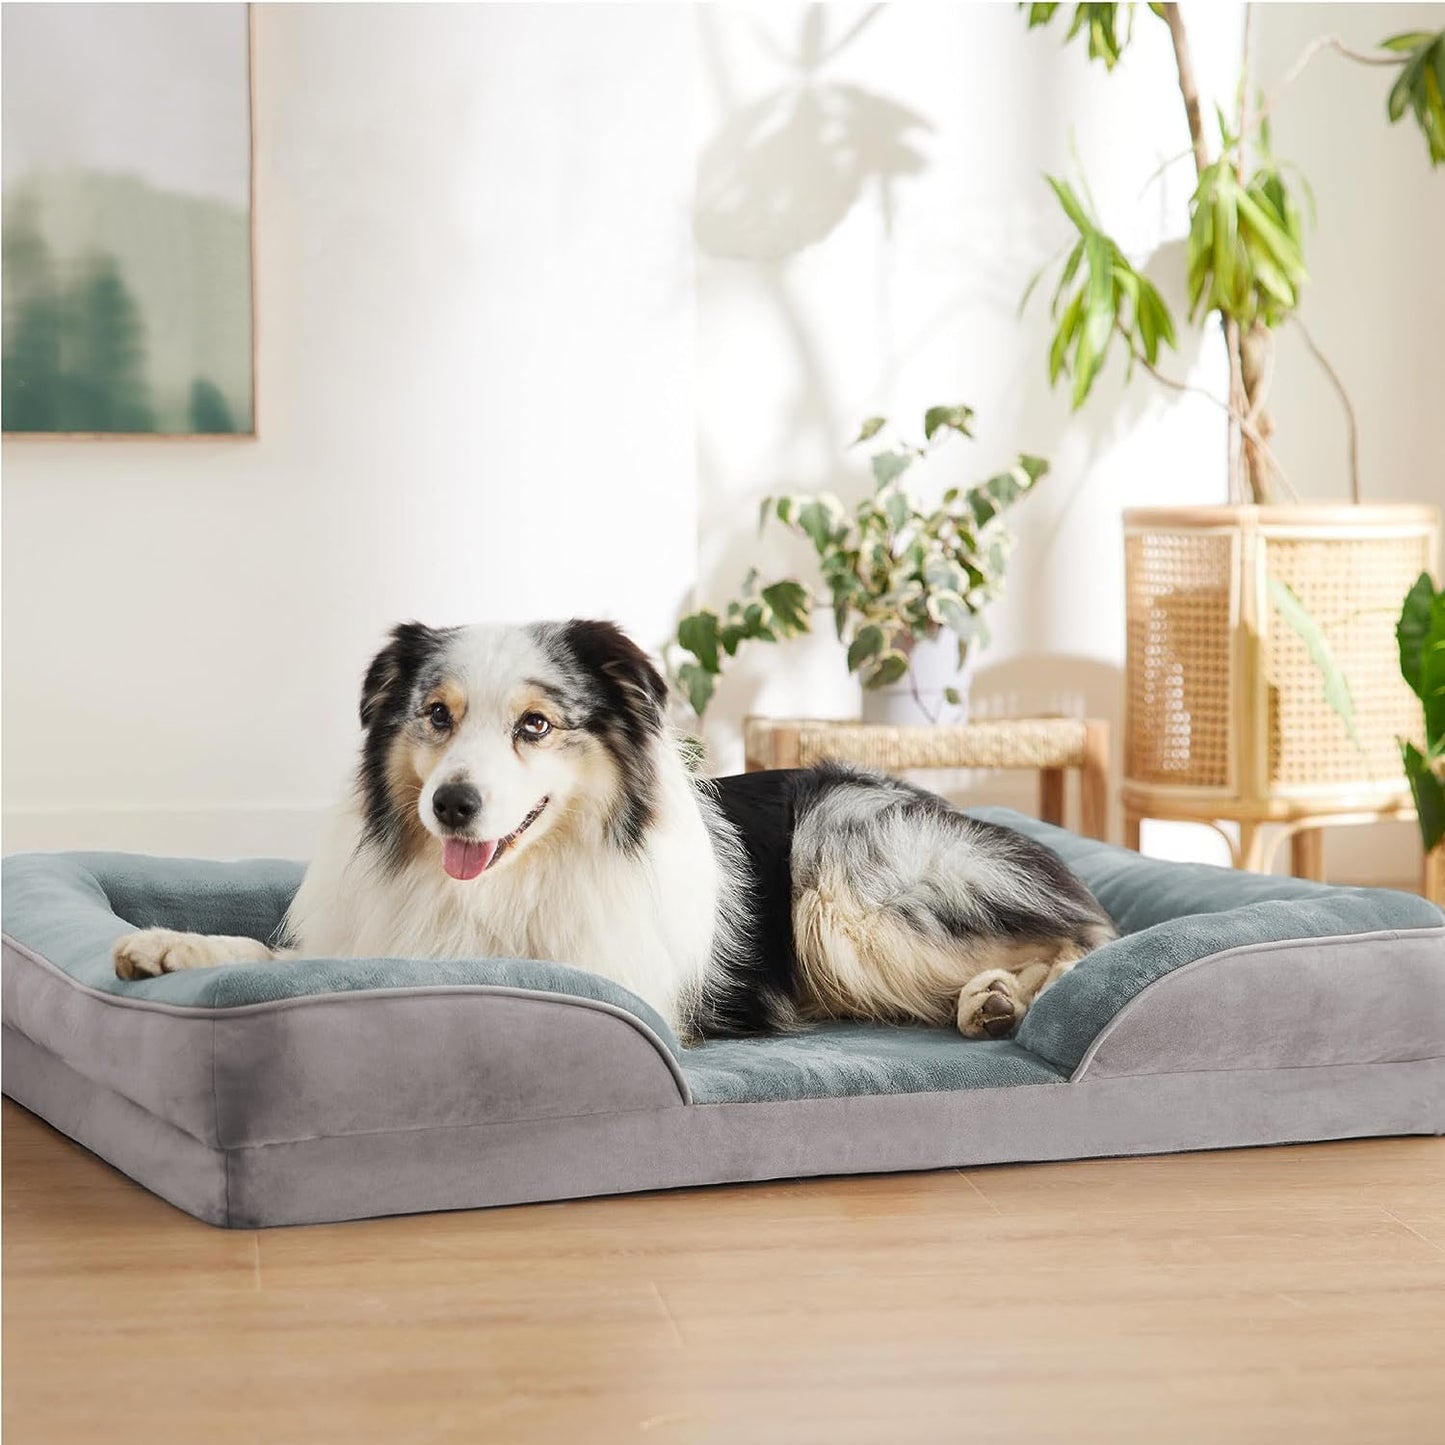 Pet Dog Bed Soft Warm Plush Puppy Cat Bed Cozy Nest Sofa Non-Slip Bed Cushion Mat Removable Washable Cover Waterproof Lining For Small Medium Dog